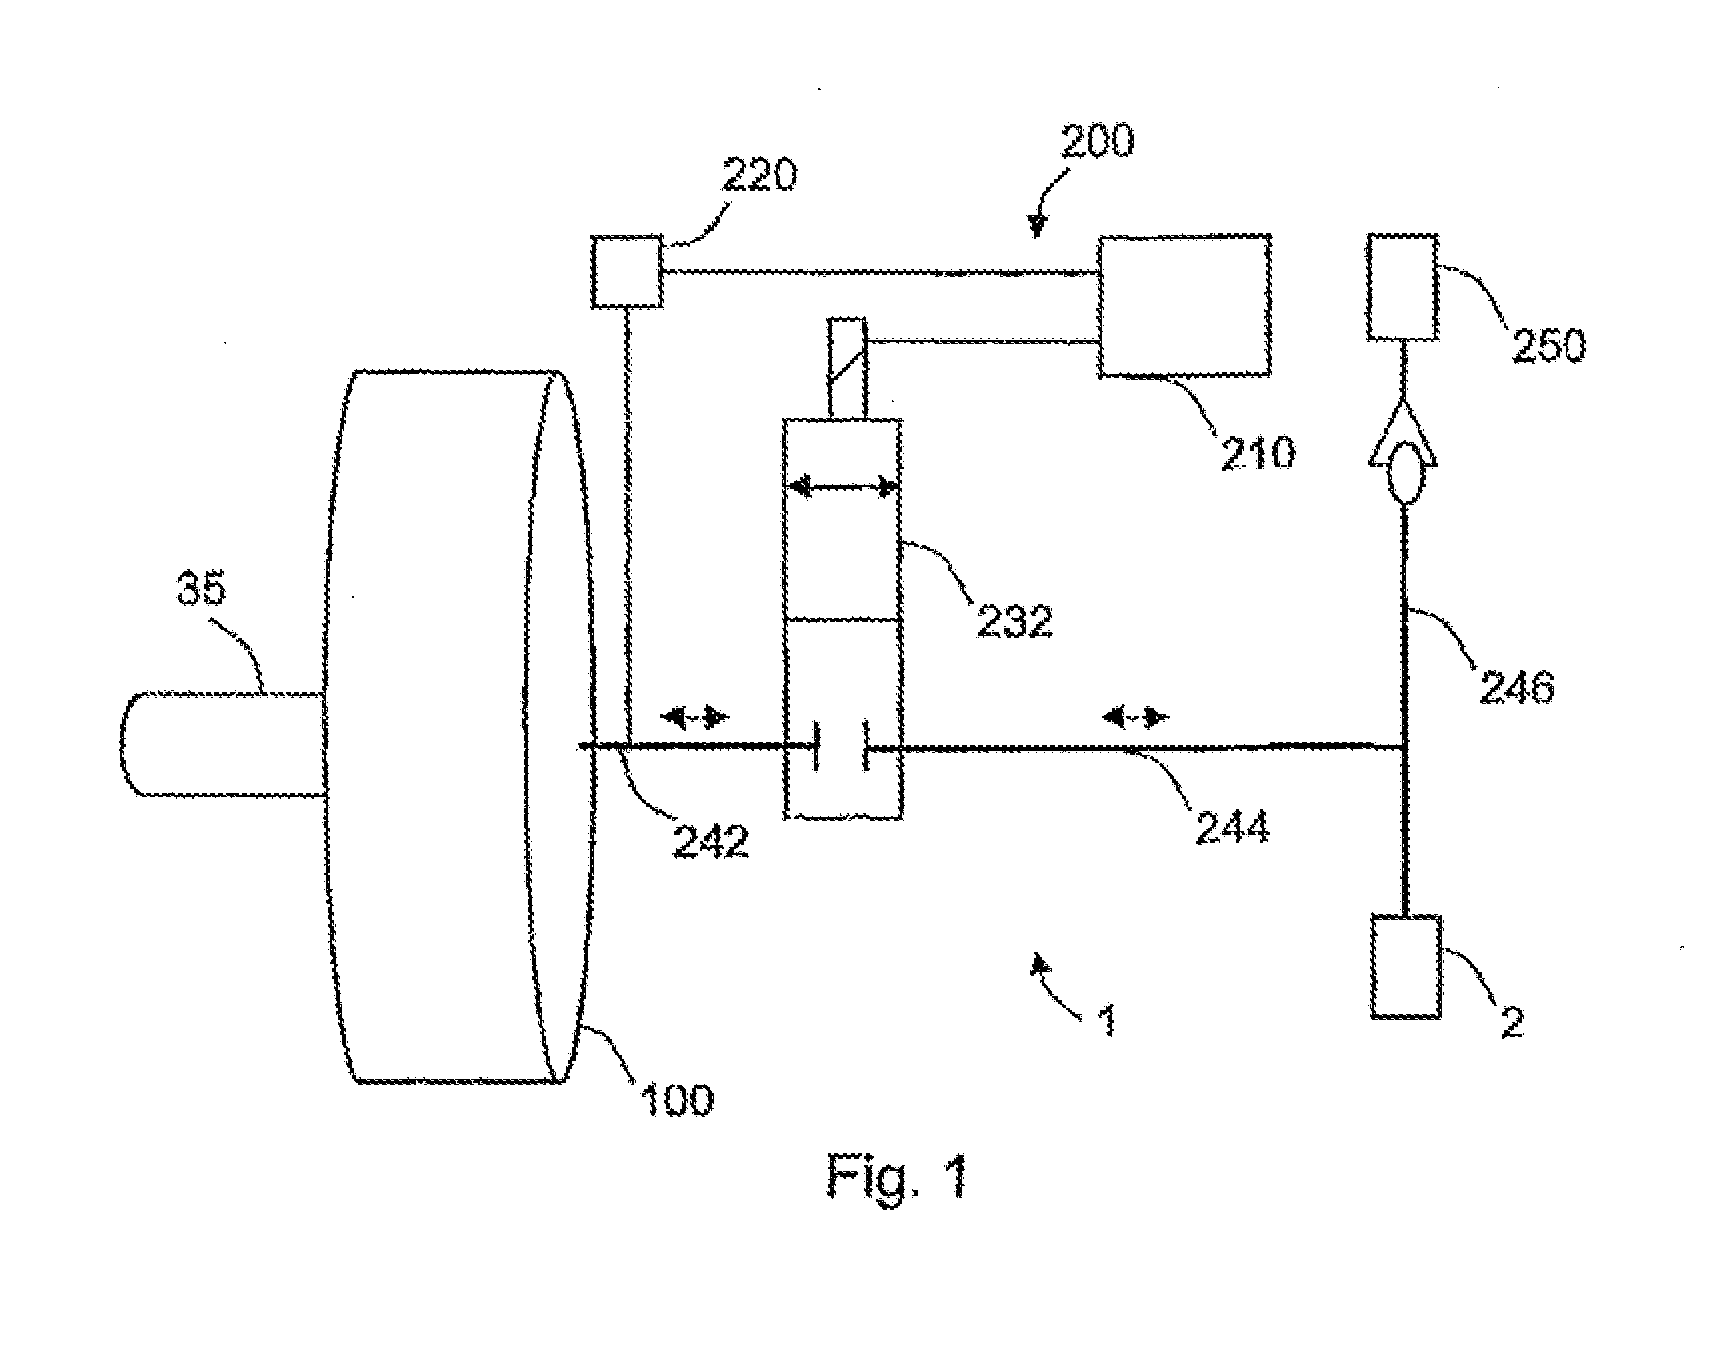 Air storage system for an air suspension system in a heavy vehicle